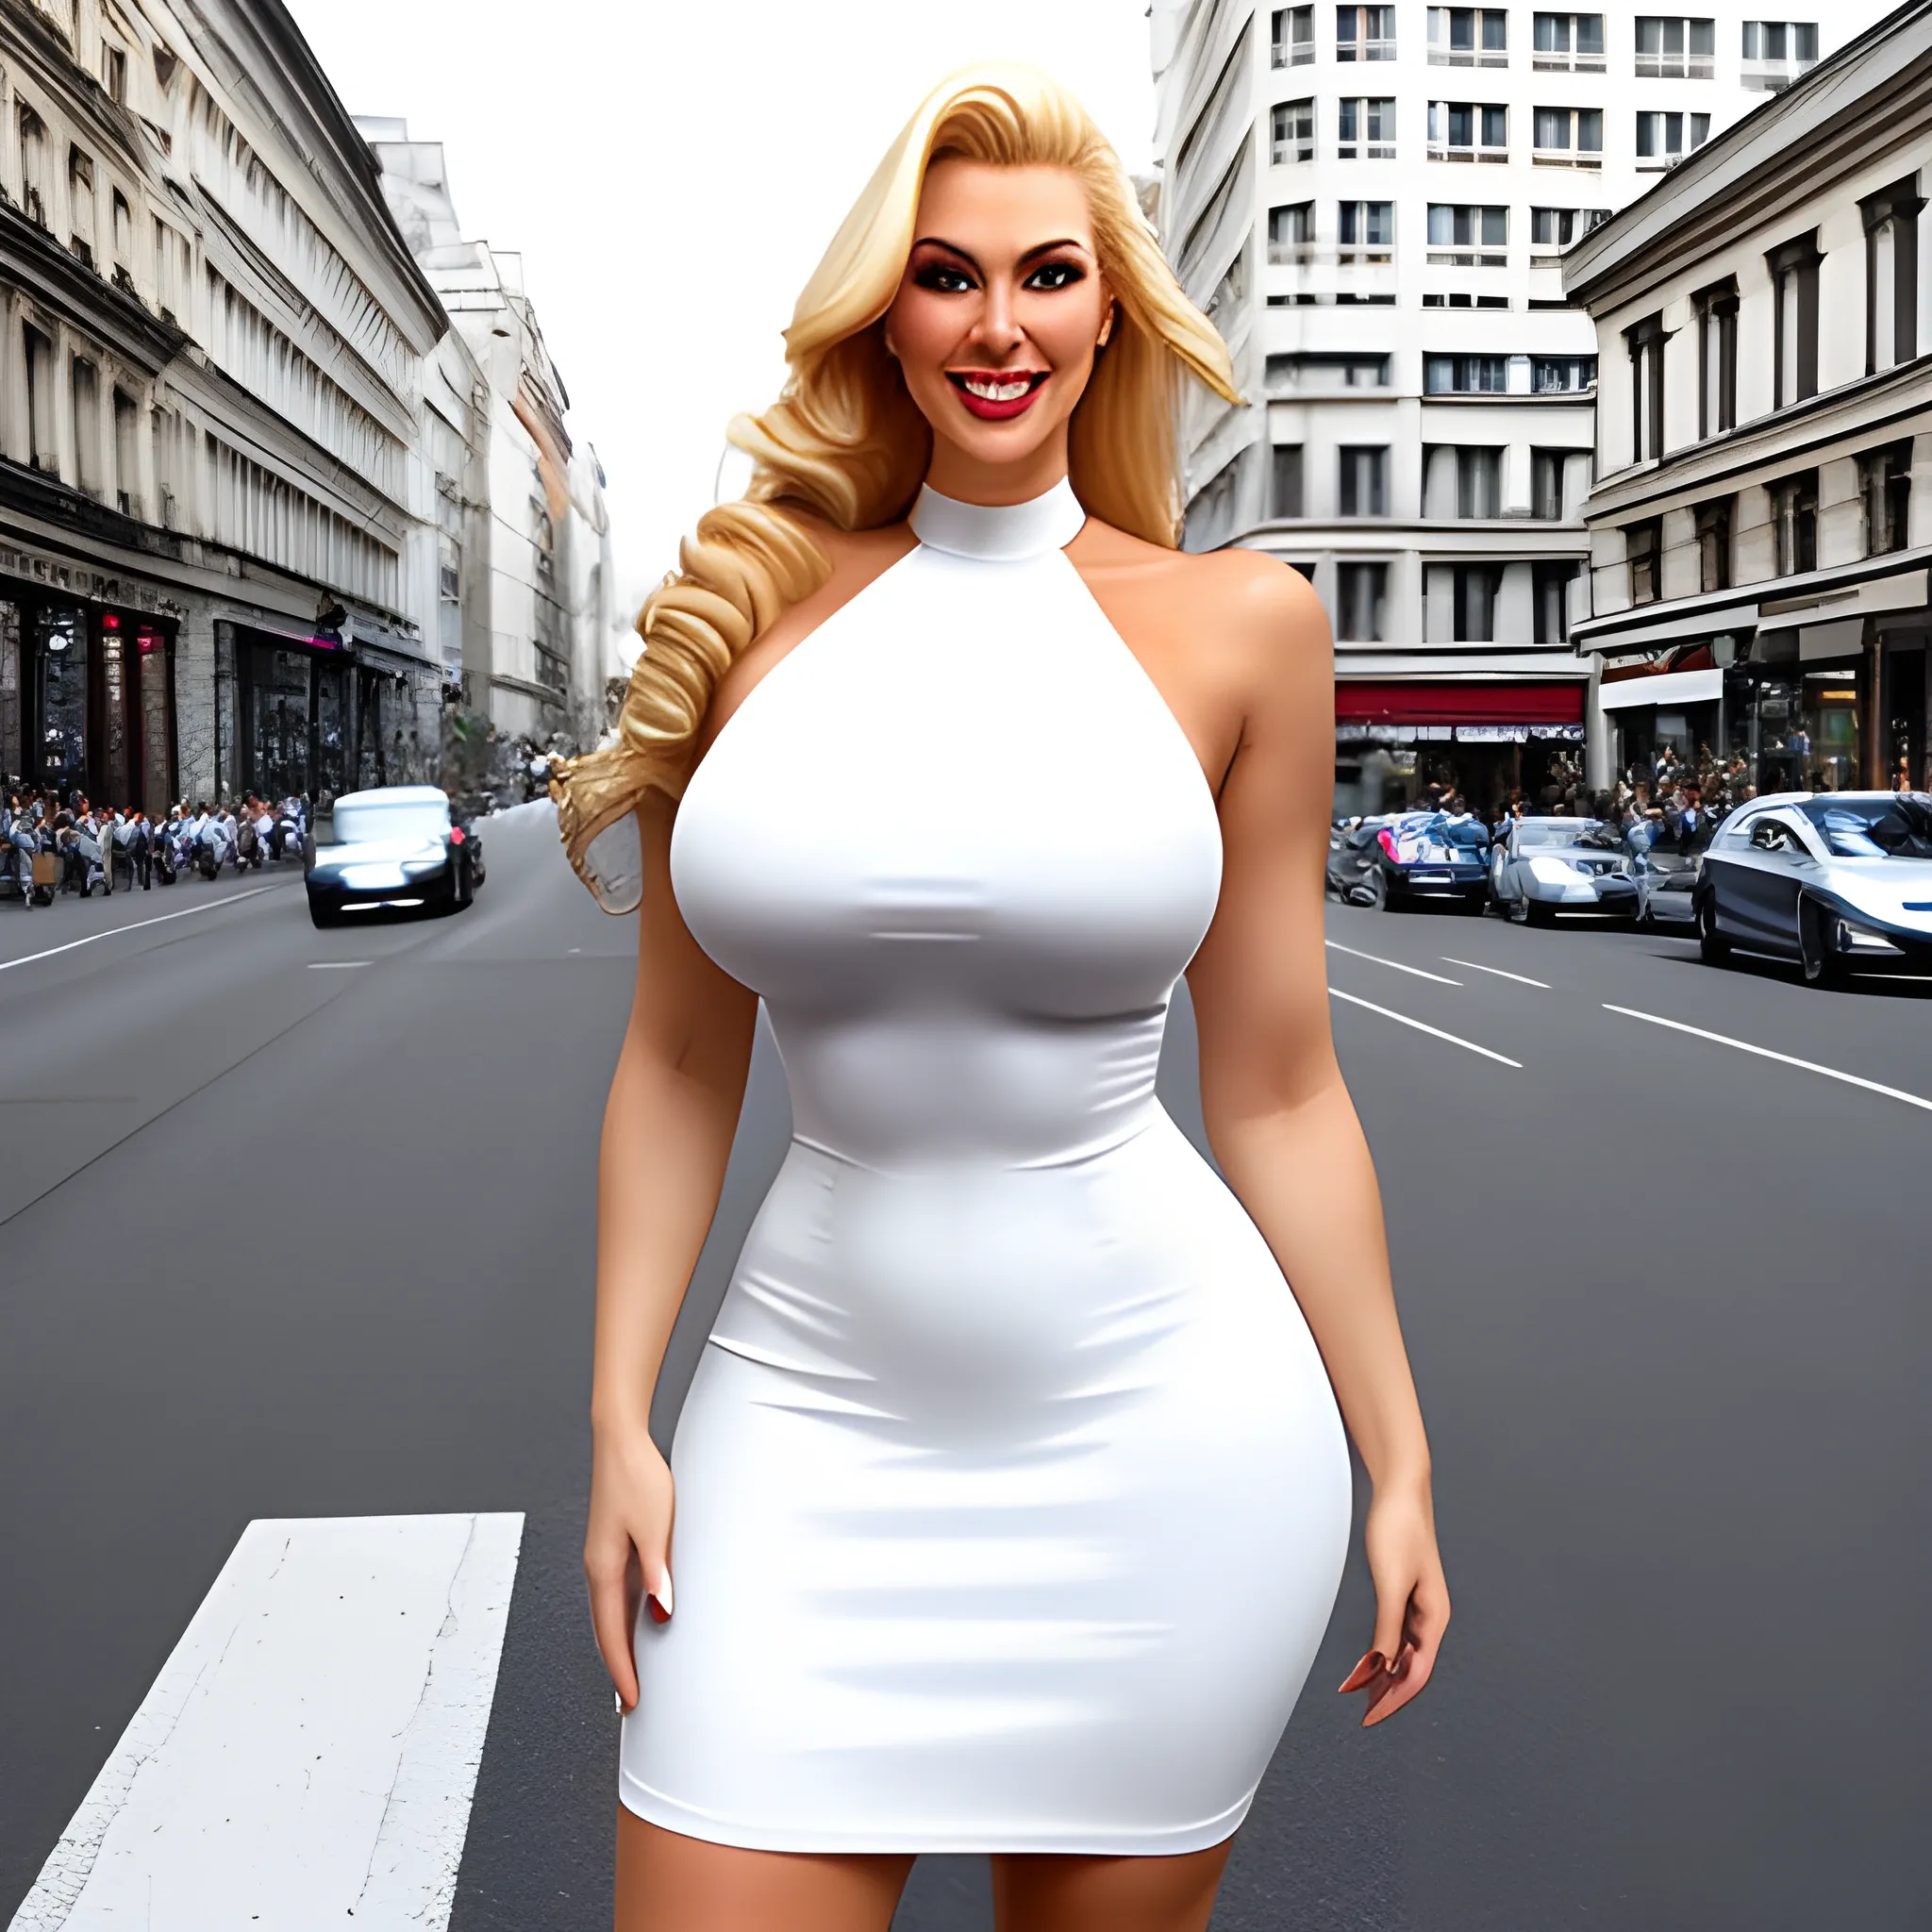 happy elegant extremly tall voluptuous blonde very young girl with very small head and very broad shoulders in short tight white dress coming on a busy street and towerring here strongly over us